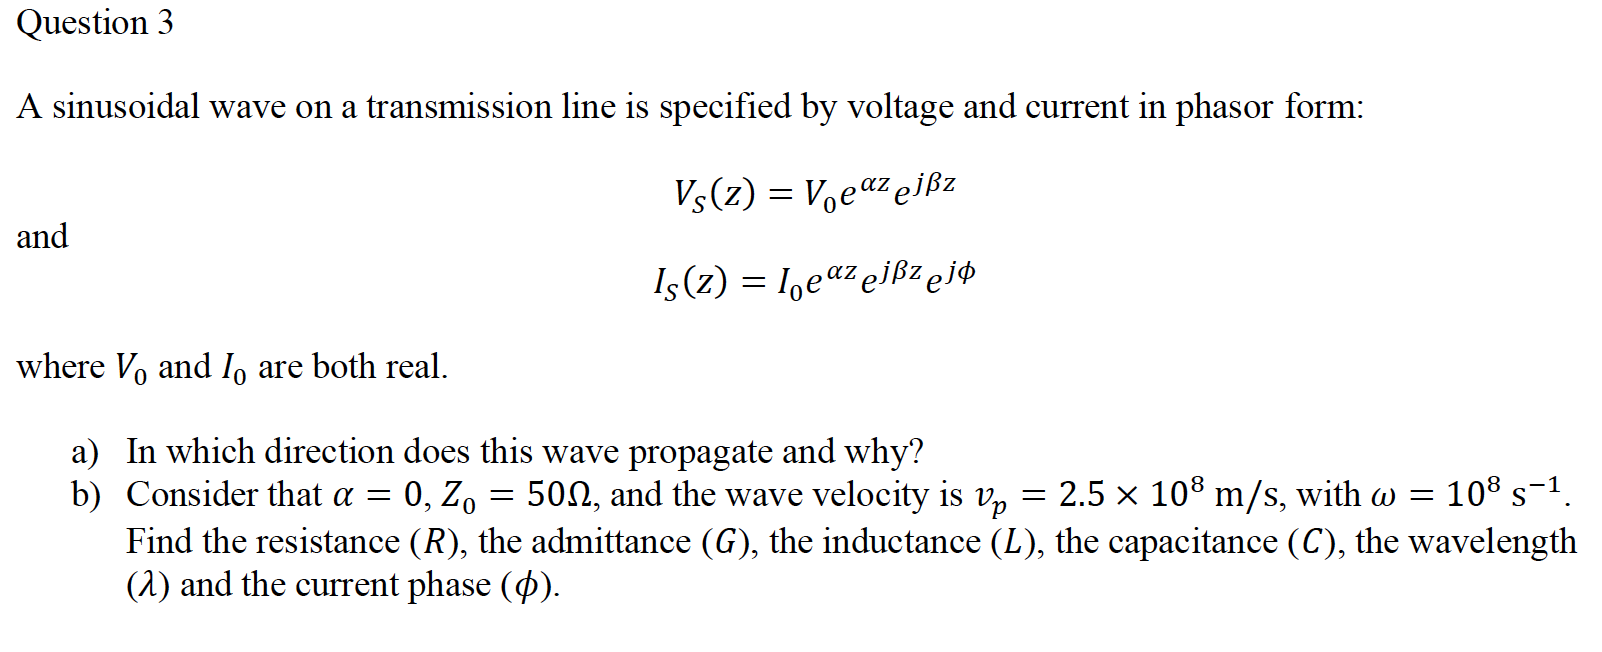 A sinusoidal wave on a transmission line is specified by voltage and current in phasor form:
Vs(z) = Voeaz ejßz
and
I (z) = I,eaz elßzej¢
where Vo and I, are both real.
a) In which direction does this wave propagate and why?
b) Consider that a =
Find the resistance (R), the admittance (G), the inductance (L), the capacitance (C), the wavelength
(1) and the current phase (Ø).
0, Z, = 500, and the wave velocity is v,
= 2.5 x 108 m/s, with w = 108 s-1.
